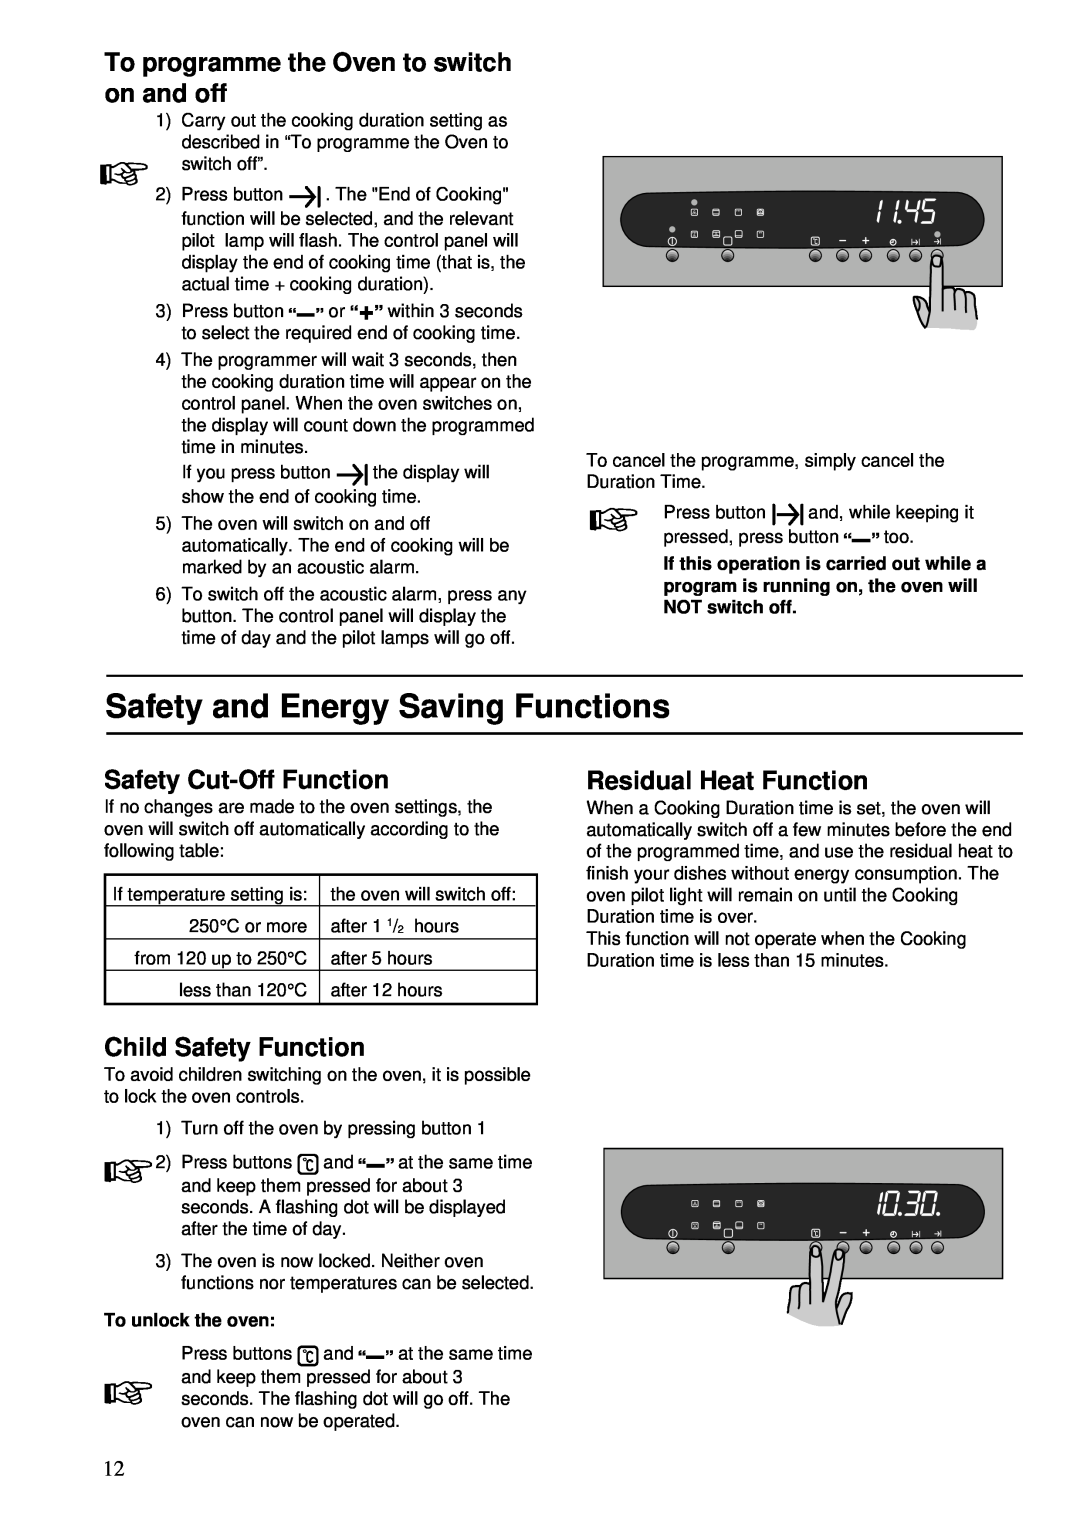 Zanussi ZBS 772 Safety and Energy Saving Functions, To programme the Oven to switch on and off, Safety Cut-Off Function 